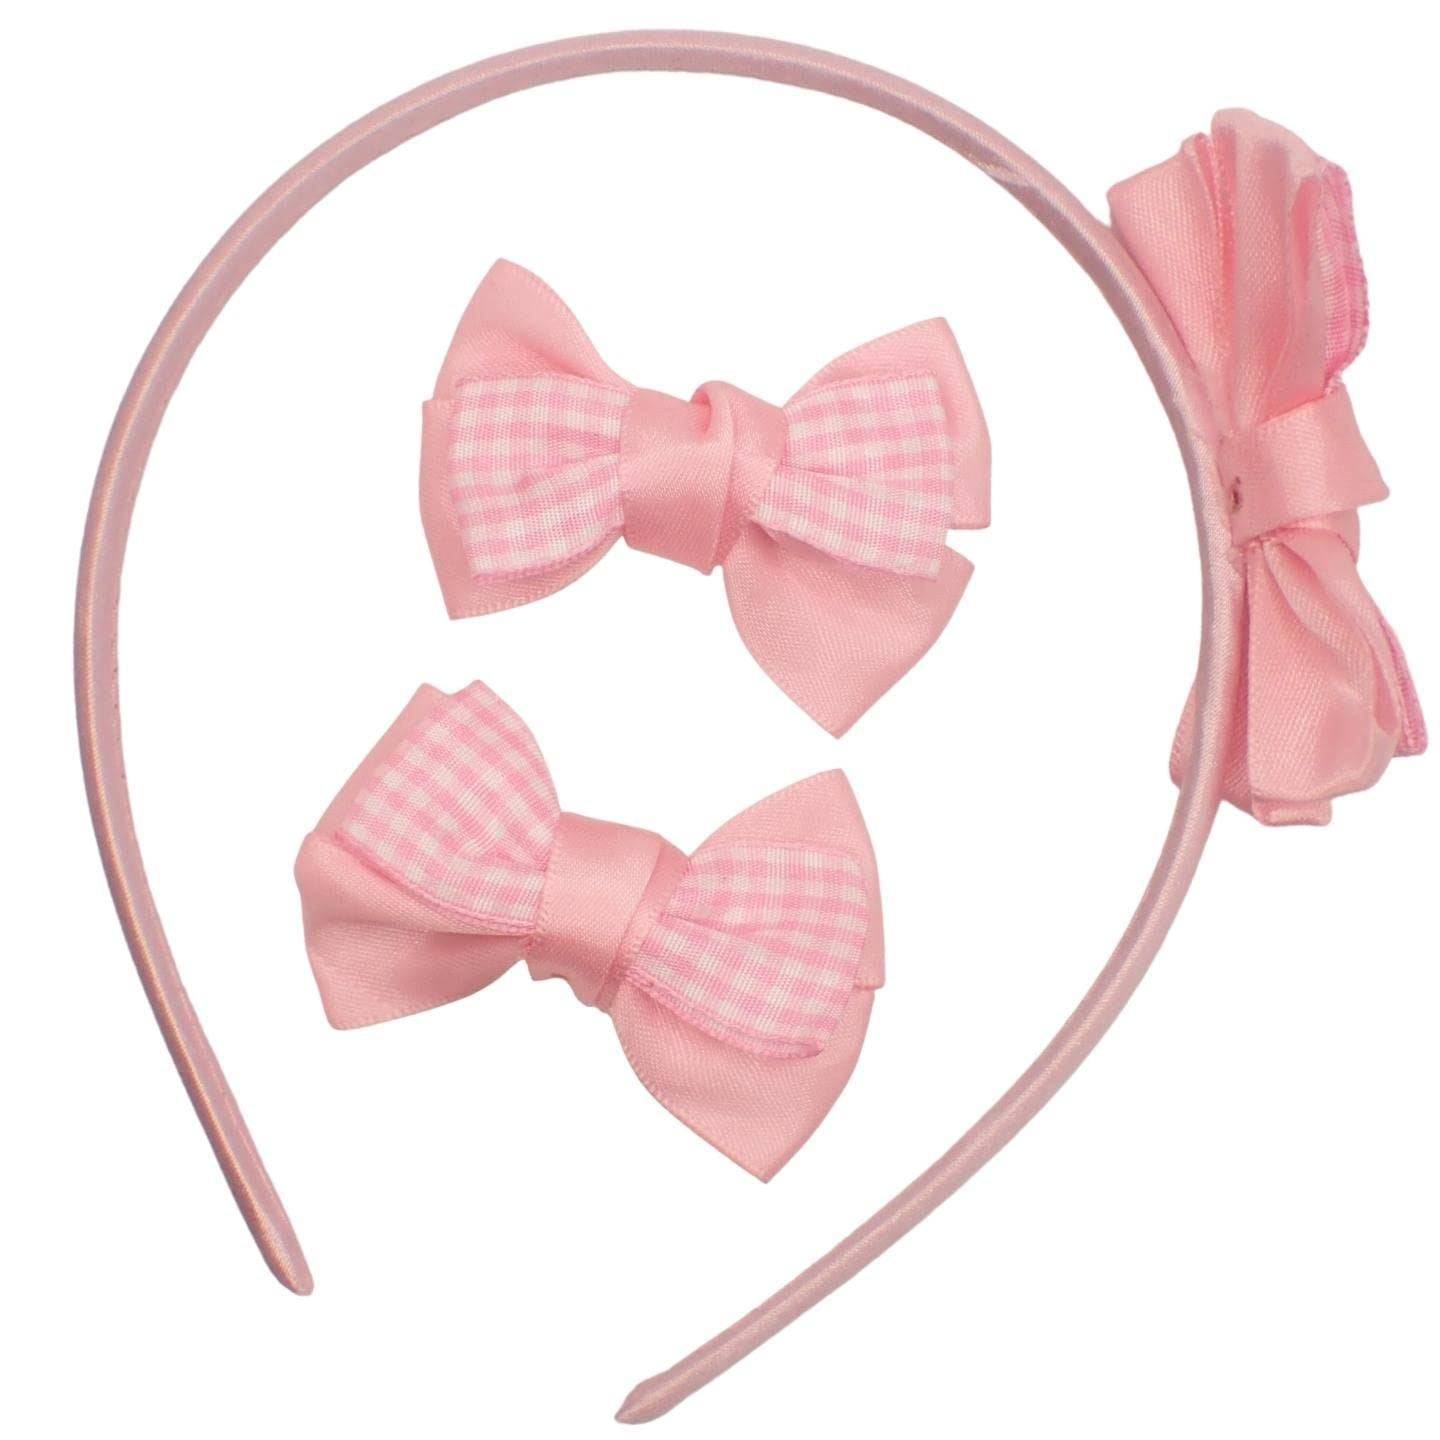 Topkids Accessories 1Cm Gingham Satin Bow Alice Band With Bow Clips, 3Pcs School Hair Accessories Fo